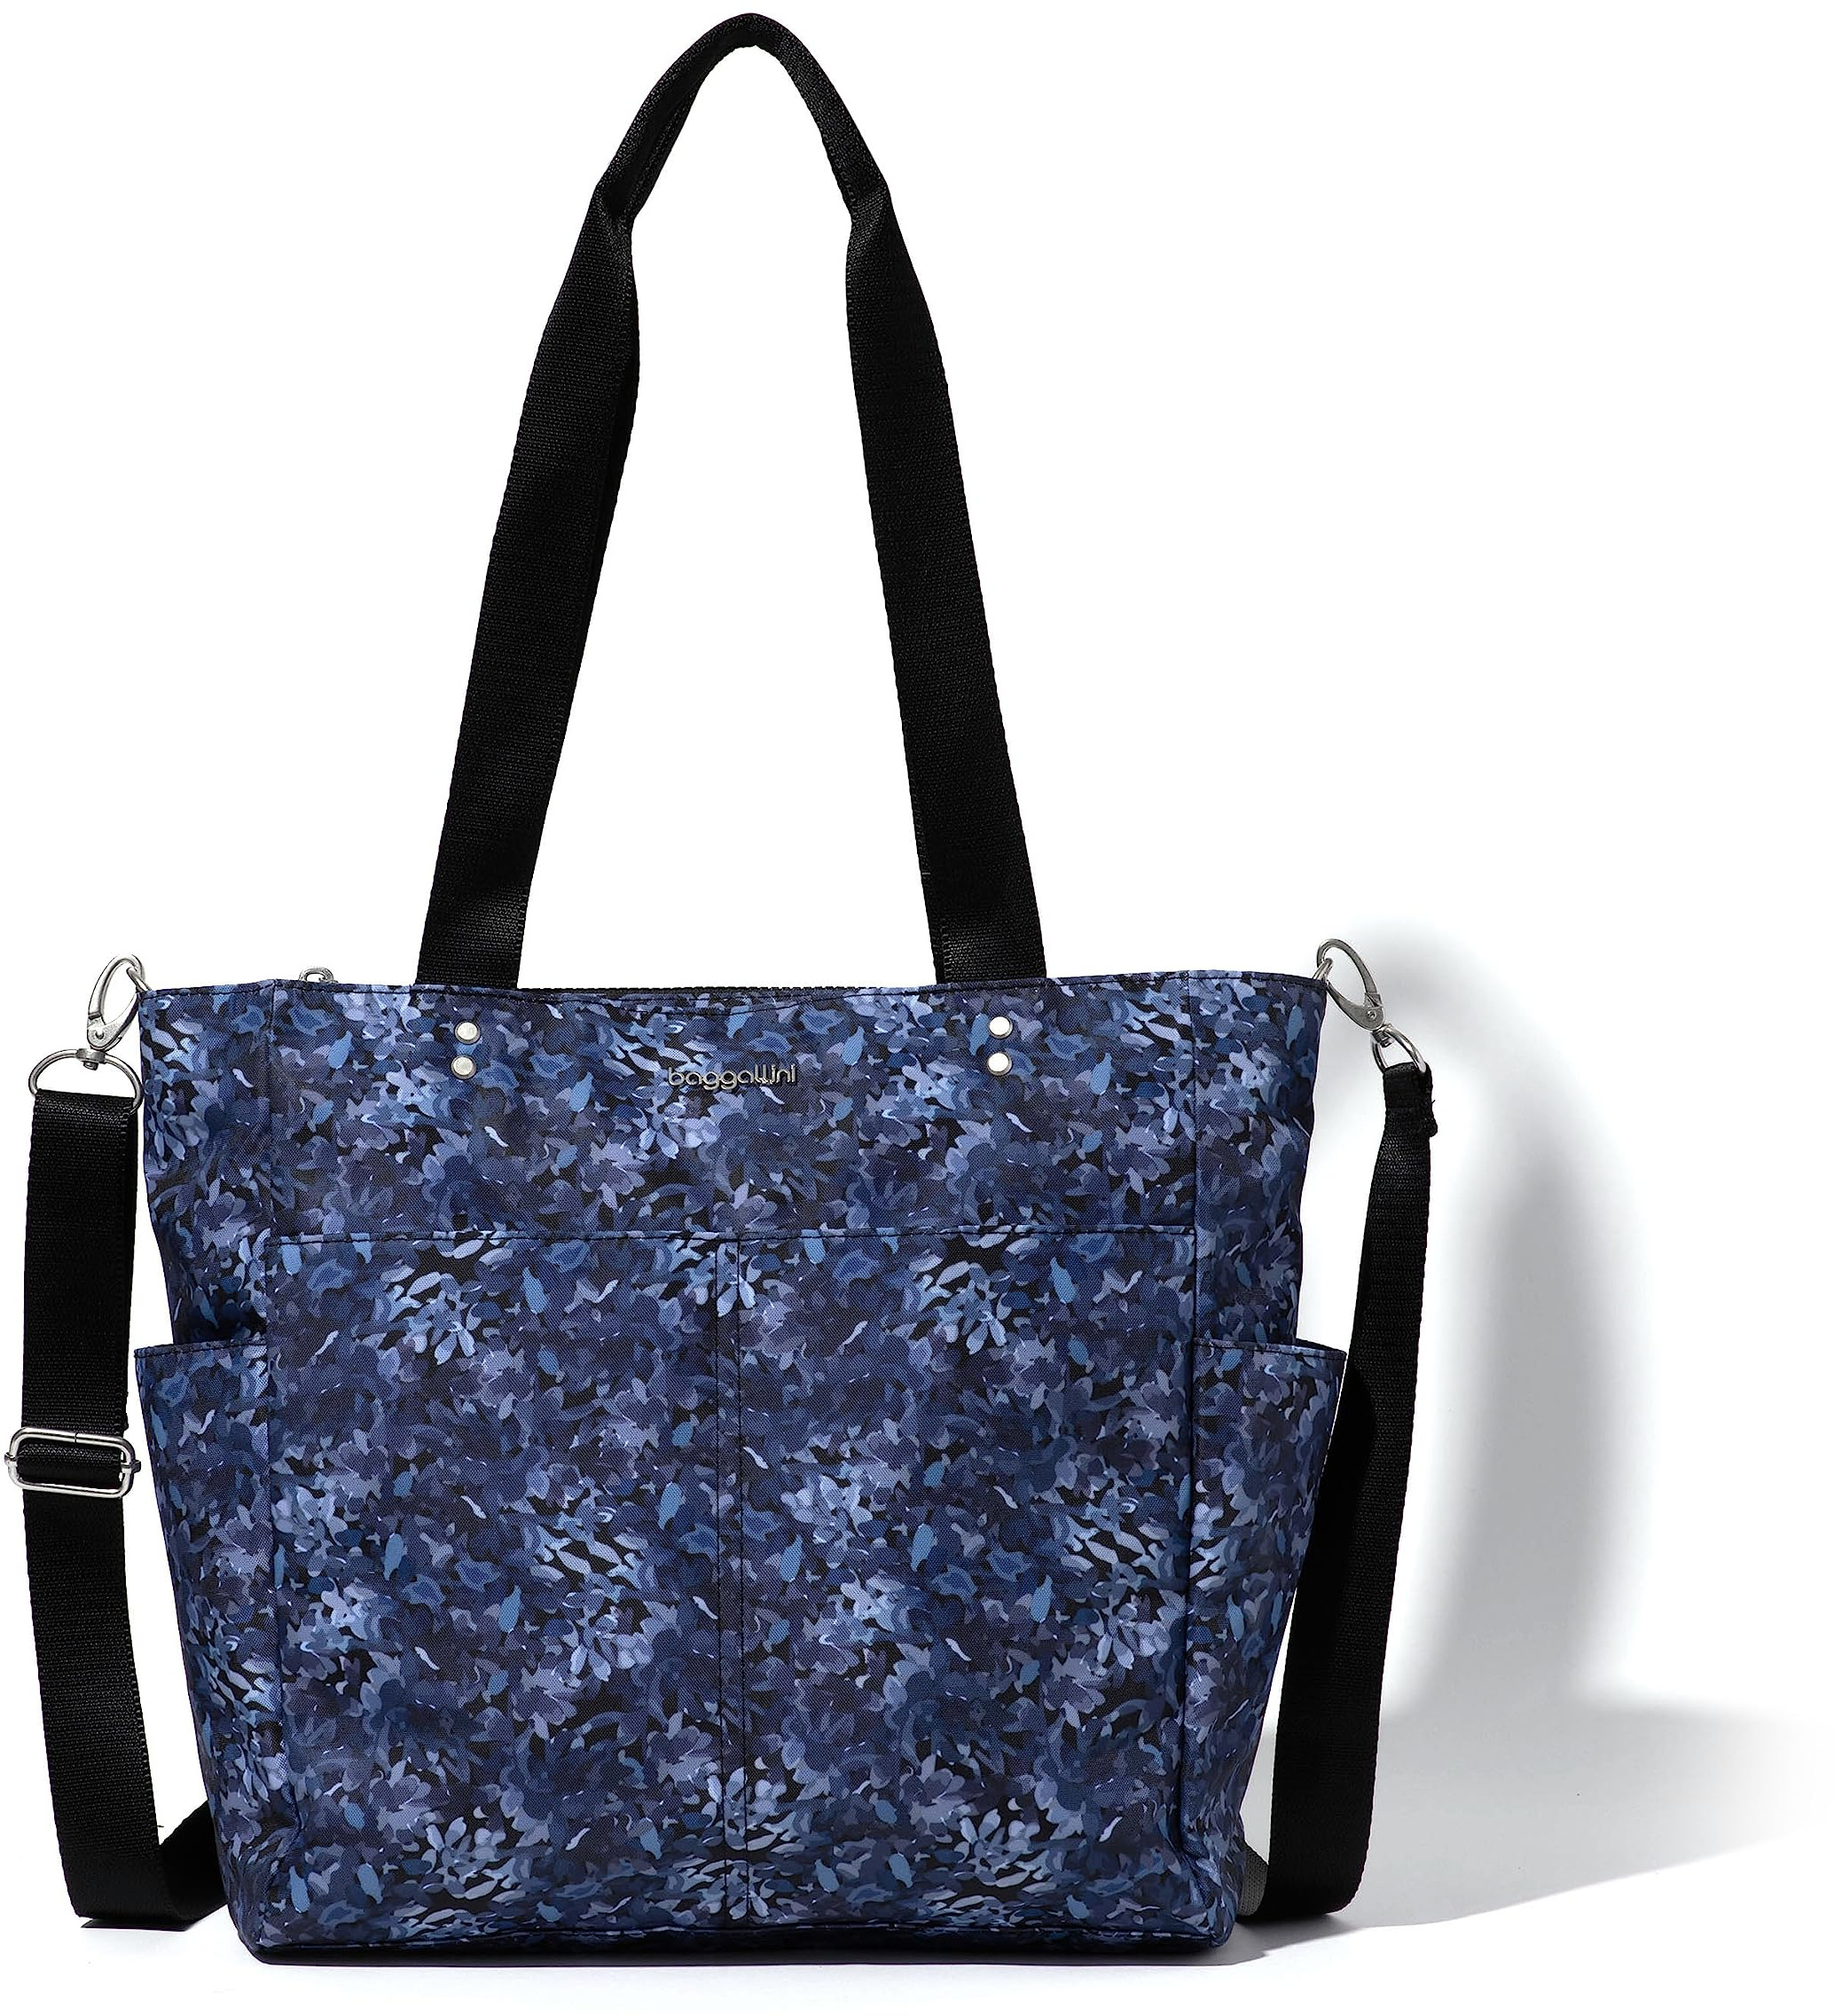 Carryall North / South Tote Baggallini